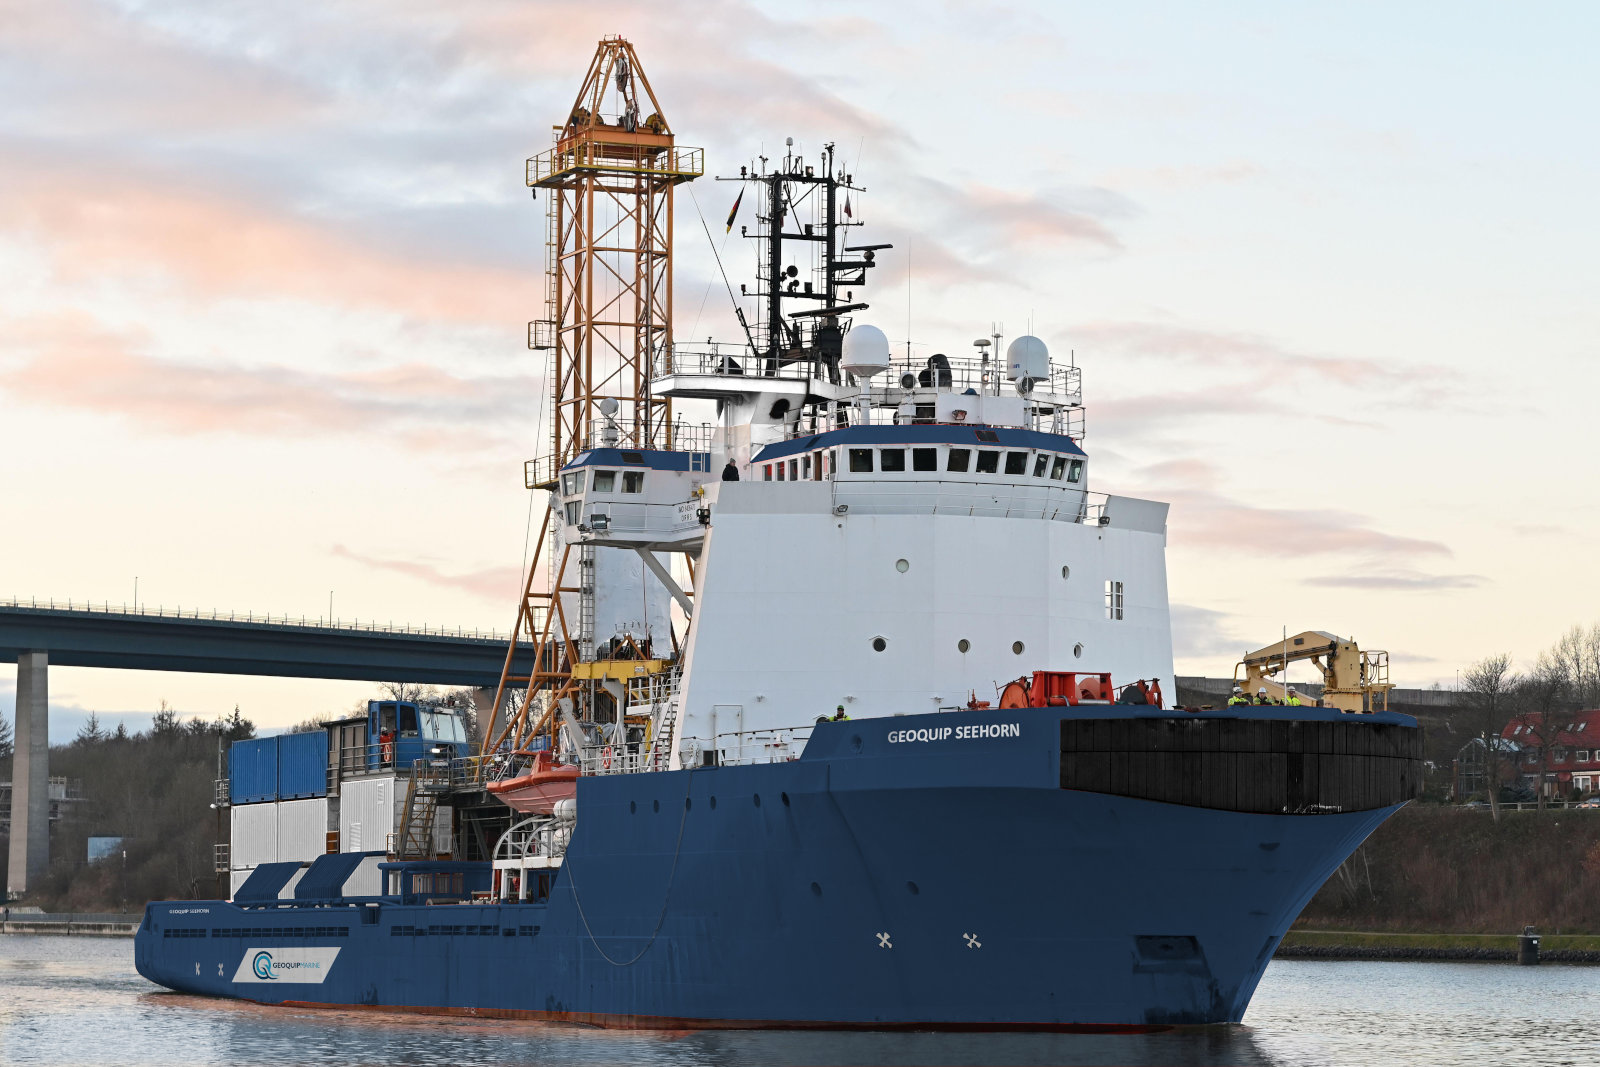 Geoquip Marine | Geoquip Marine takes delivery of the Geoquip Seehorn to add another vessel to its fleet.